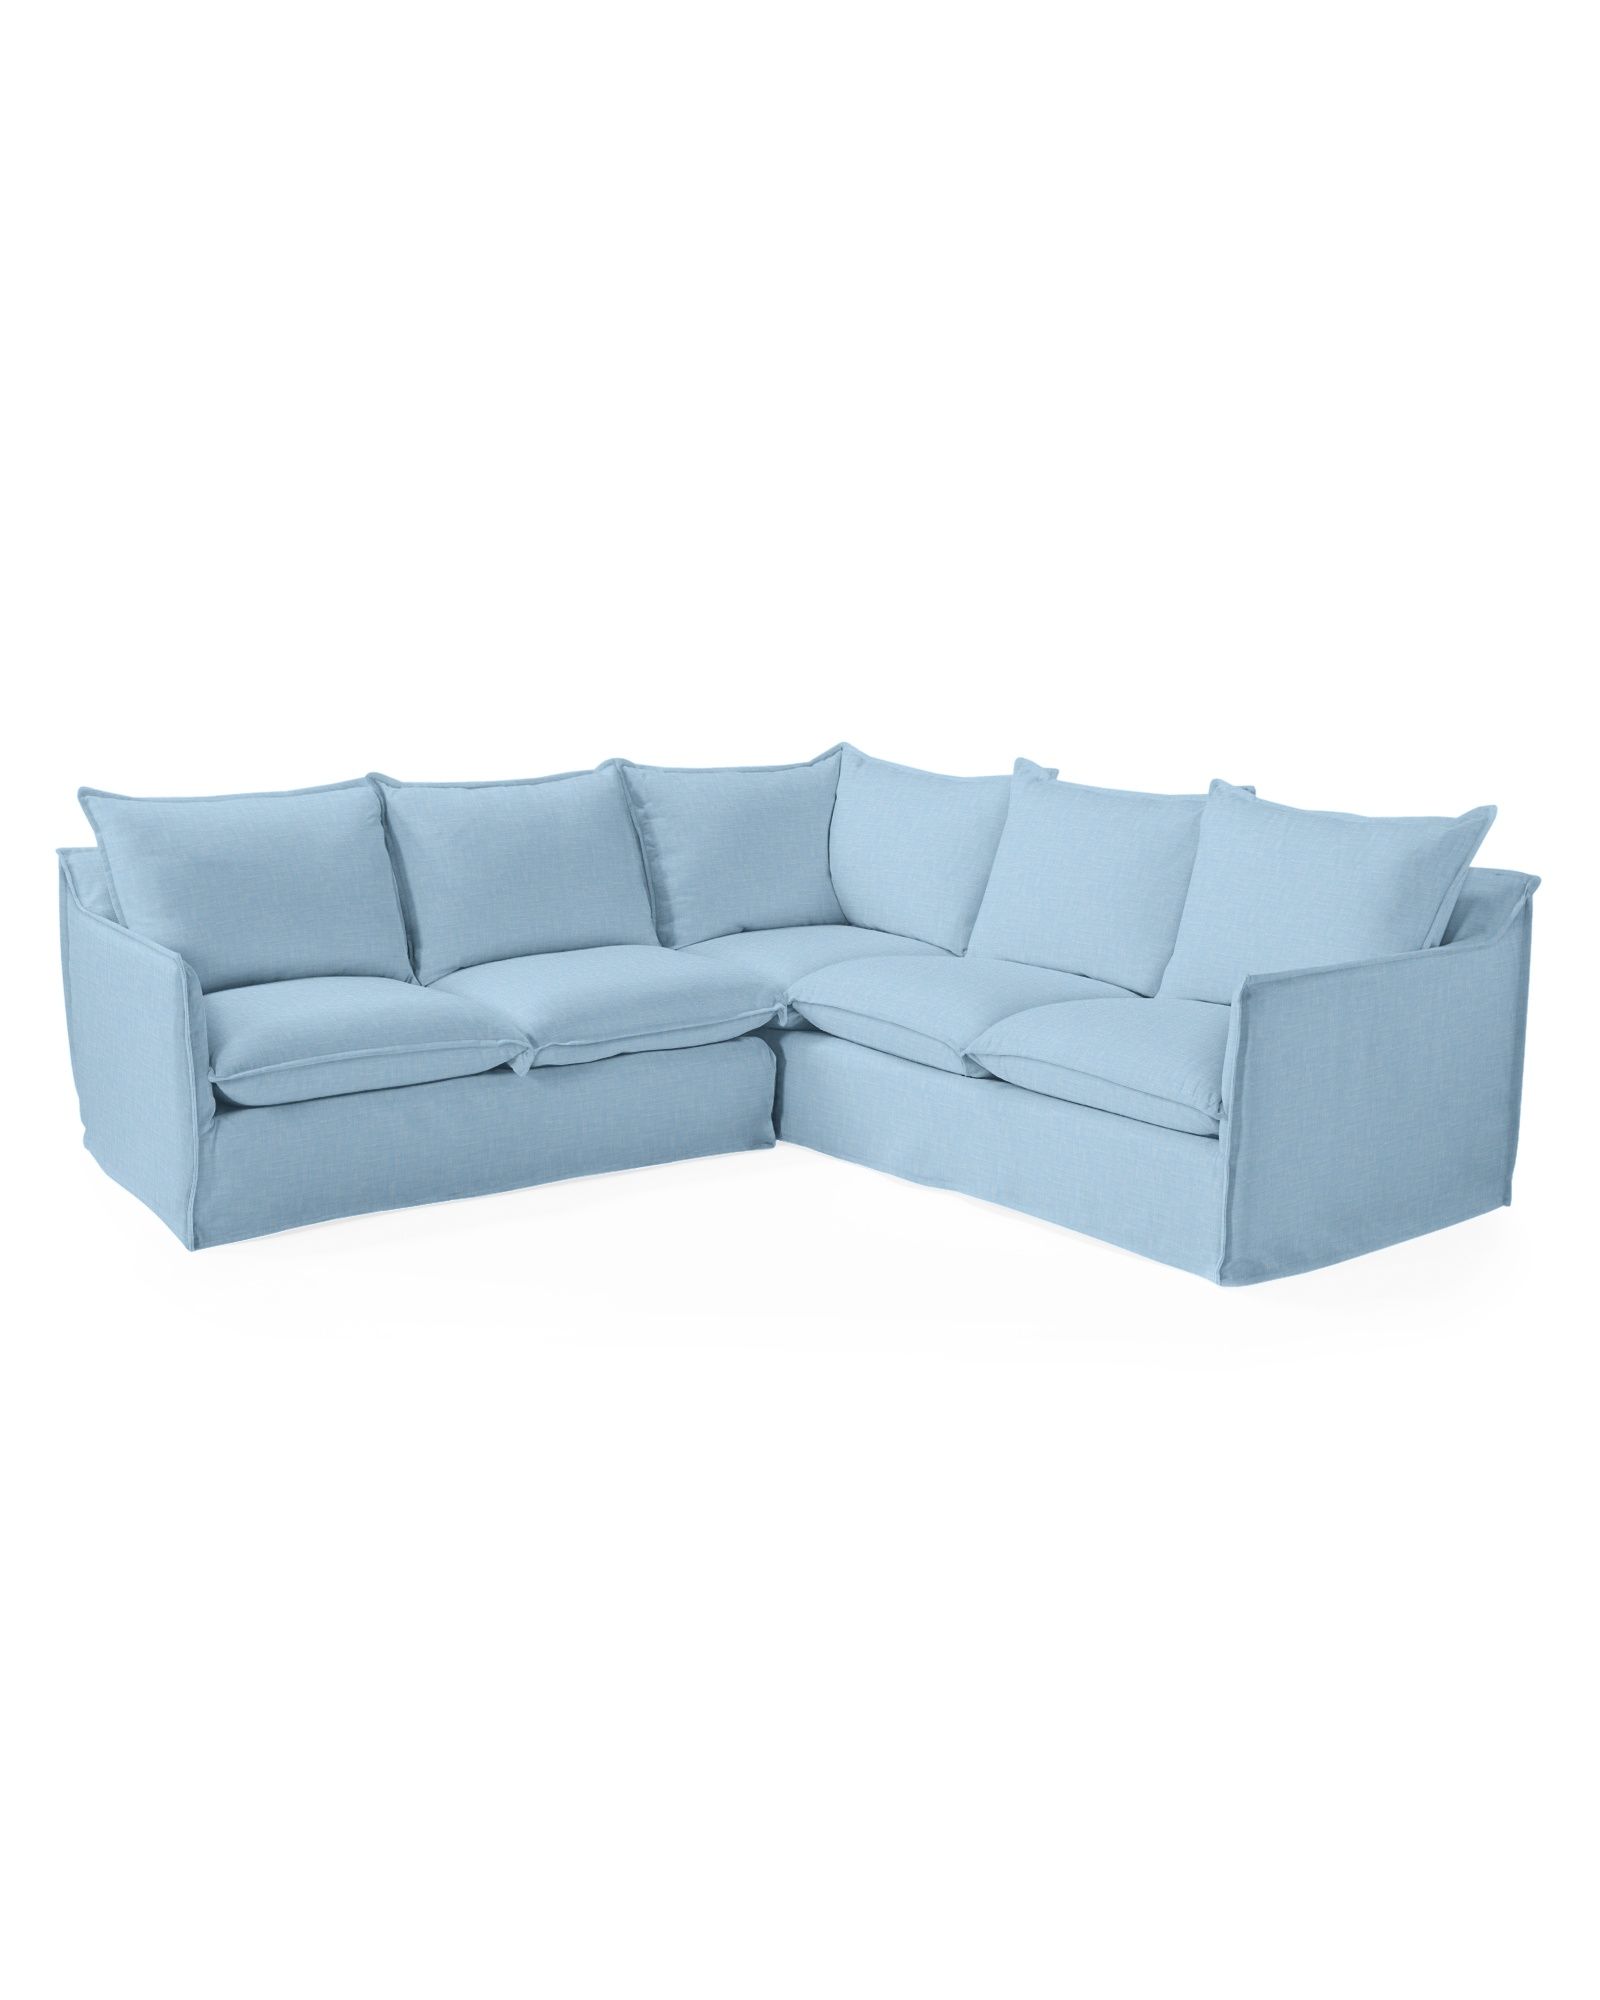 Sundial Outdoor Slipcovered Sectional - Right-Facing | Serena and Lily